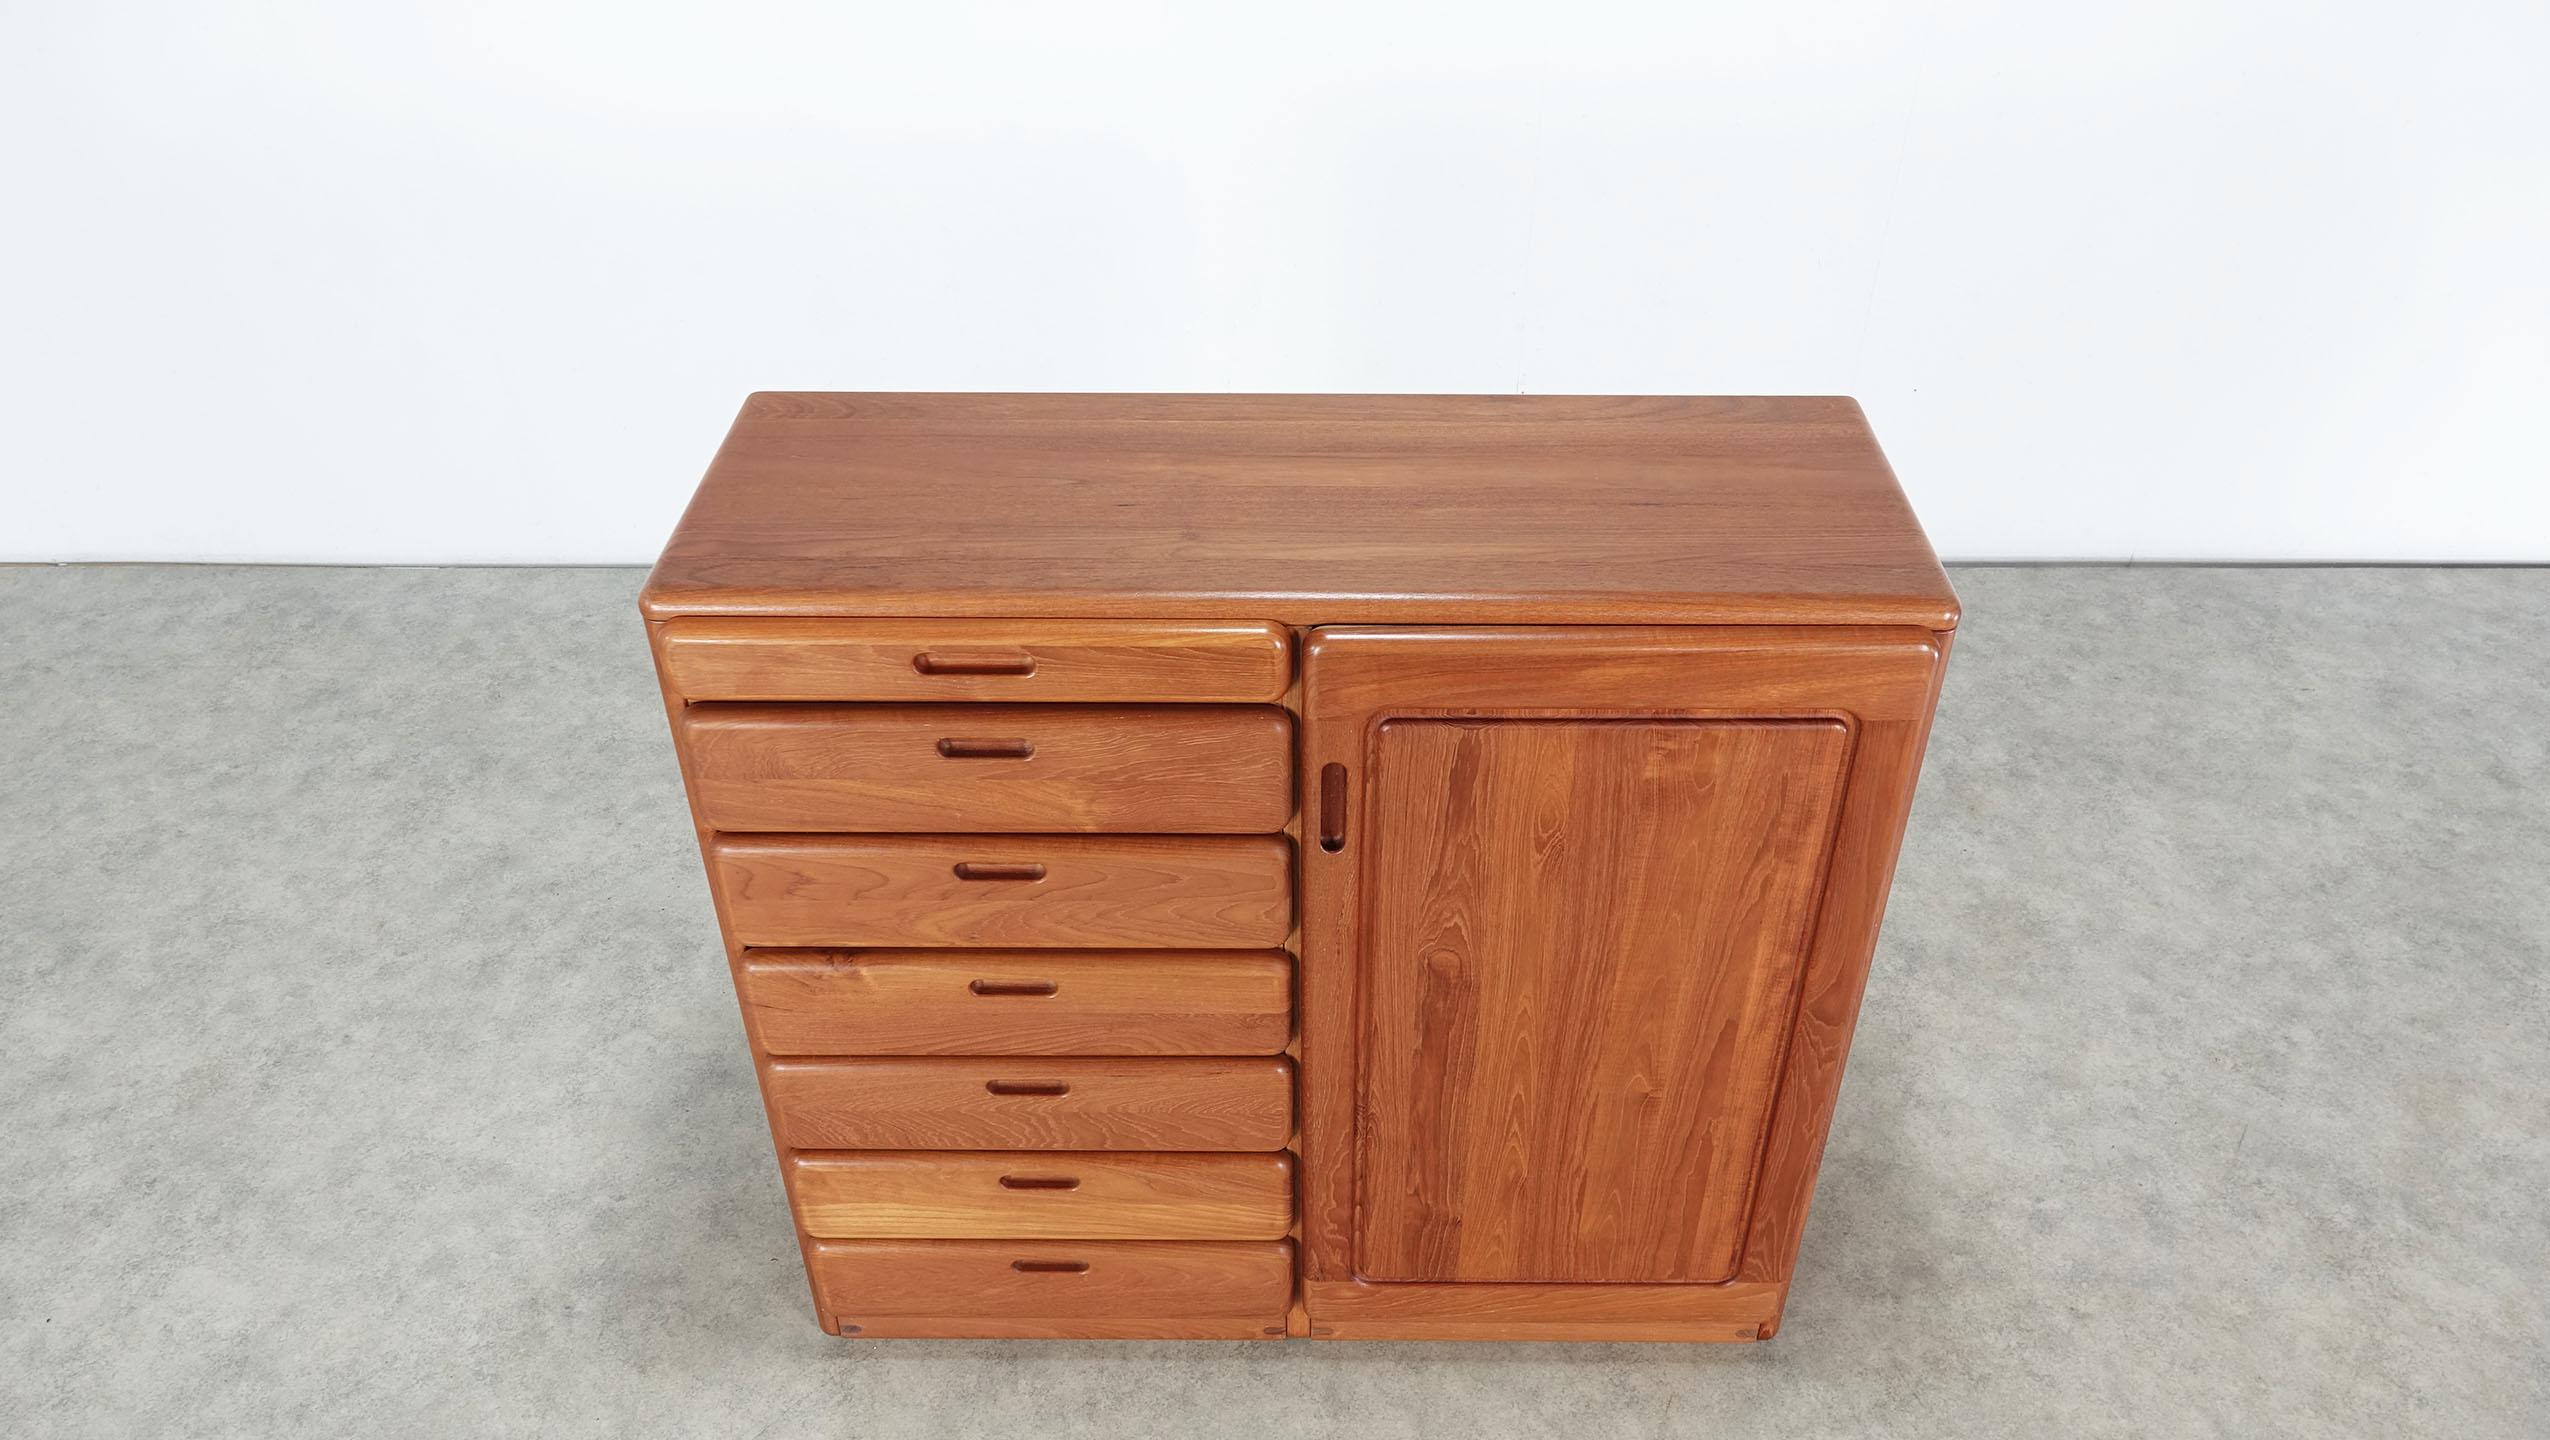 Teak Chest with Drawers and Compartments Langeskov Møbelfabrik A / S Denmark For Sale 6